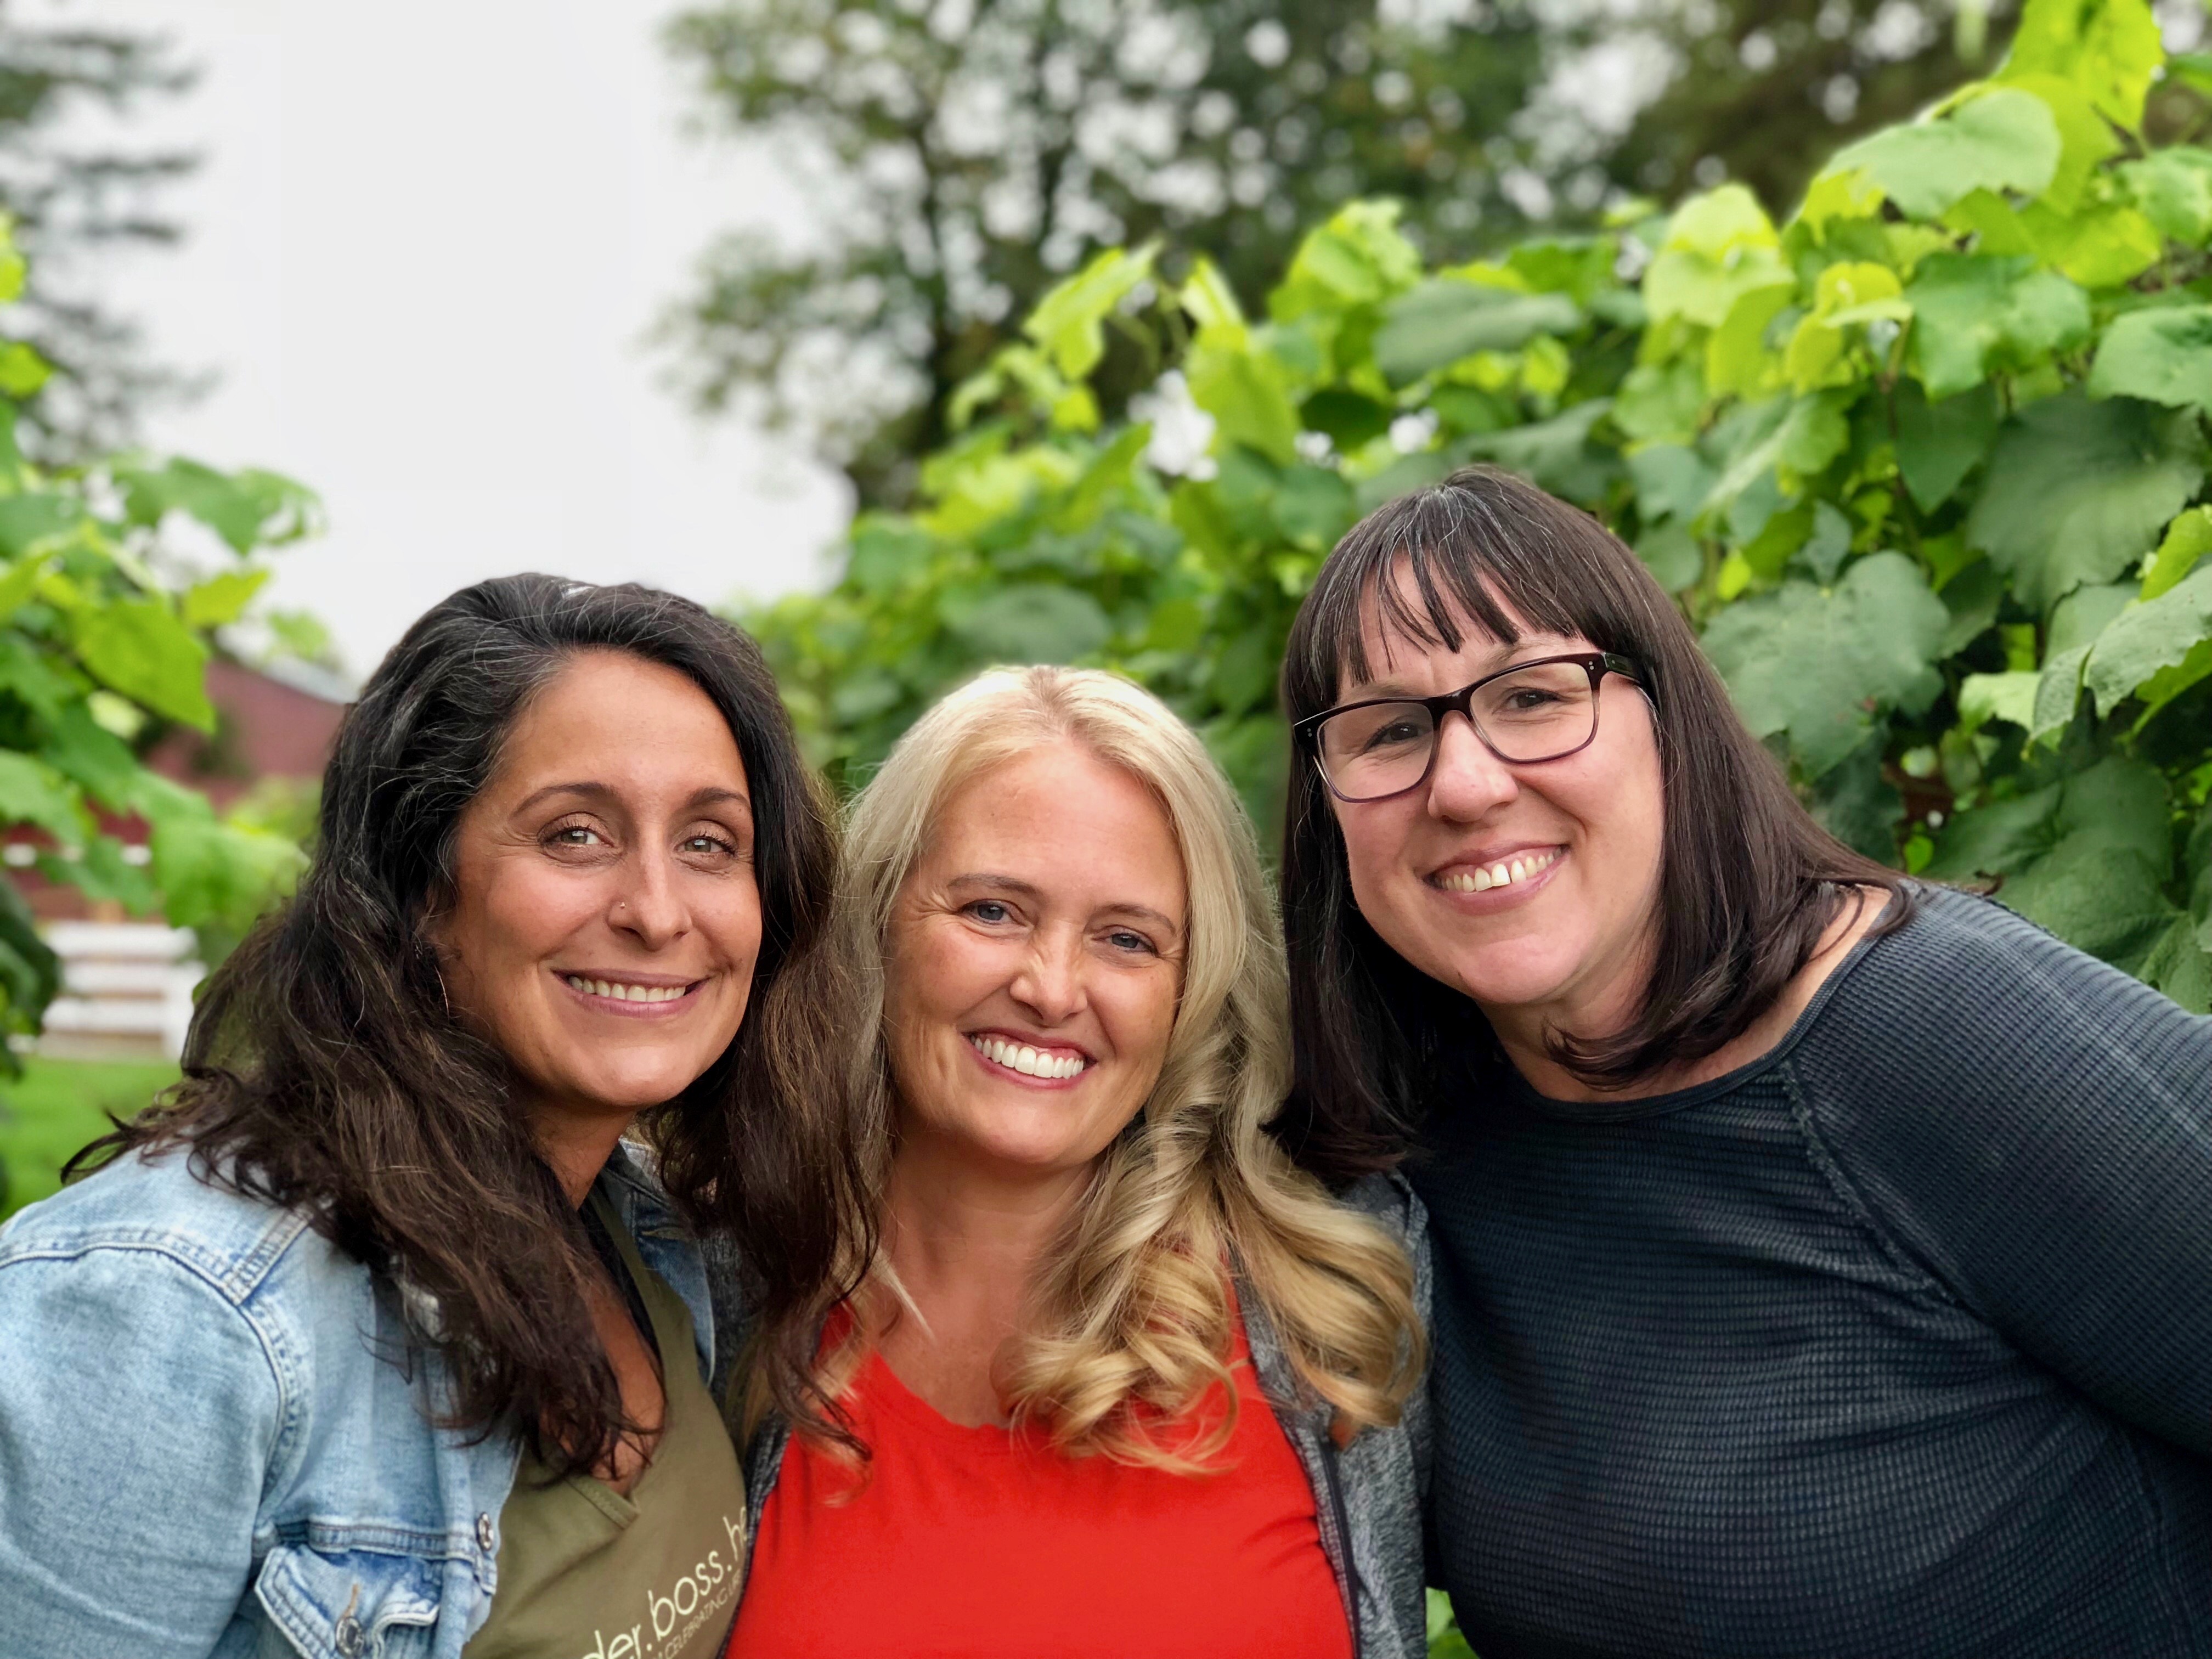 Jennifer and Patricia teamed up with Diamond Sponsor Korina Buehrer to apply for matching support from the doTERRA Healing Hands Foundation® to help fund the MamaBaby Haiti Midwifery School.